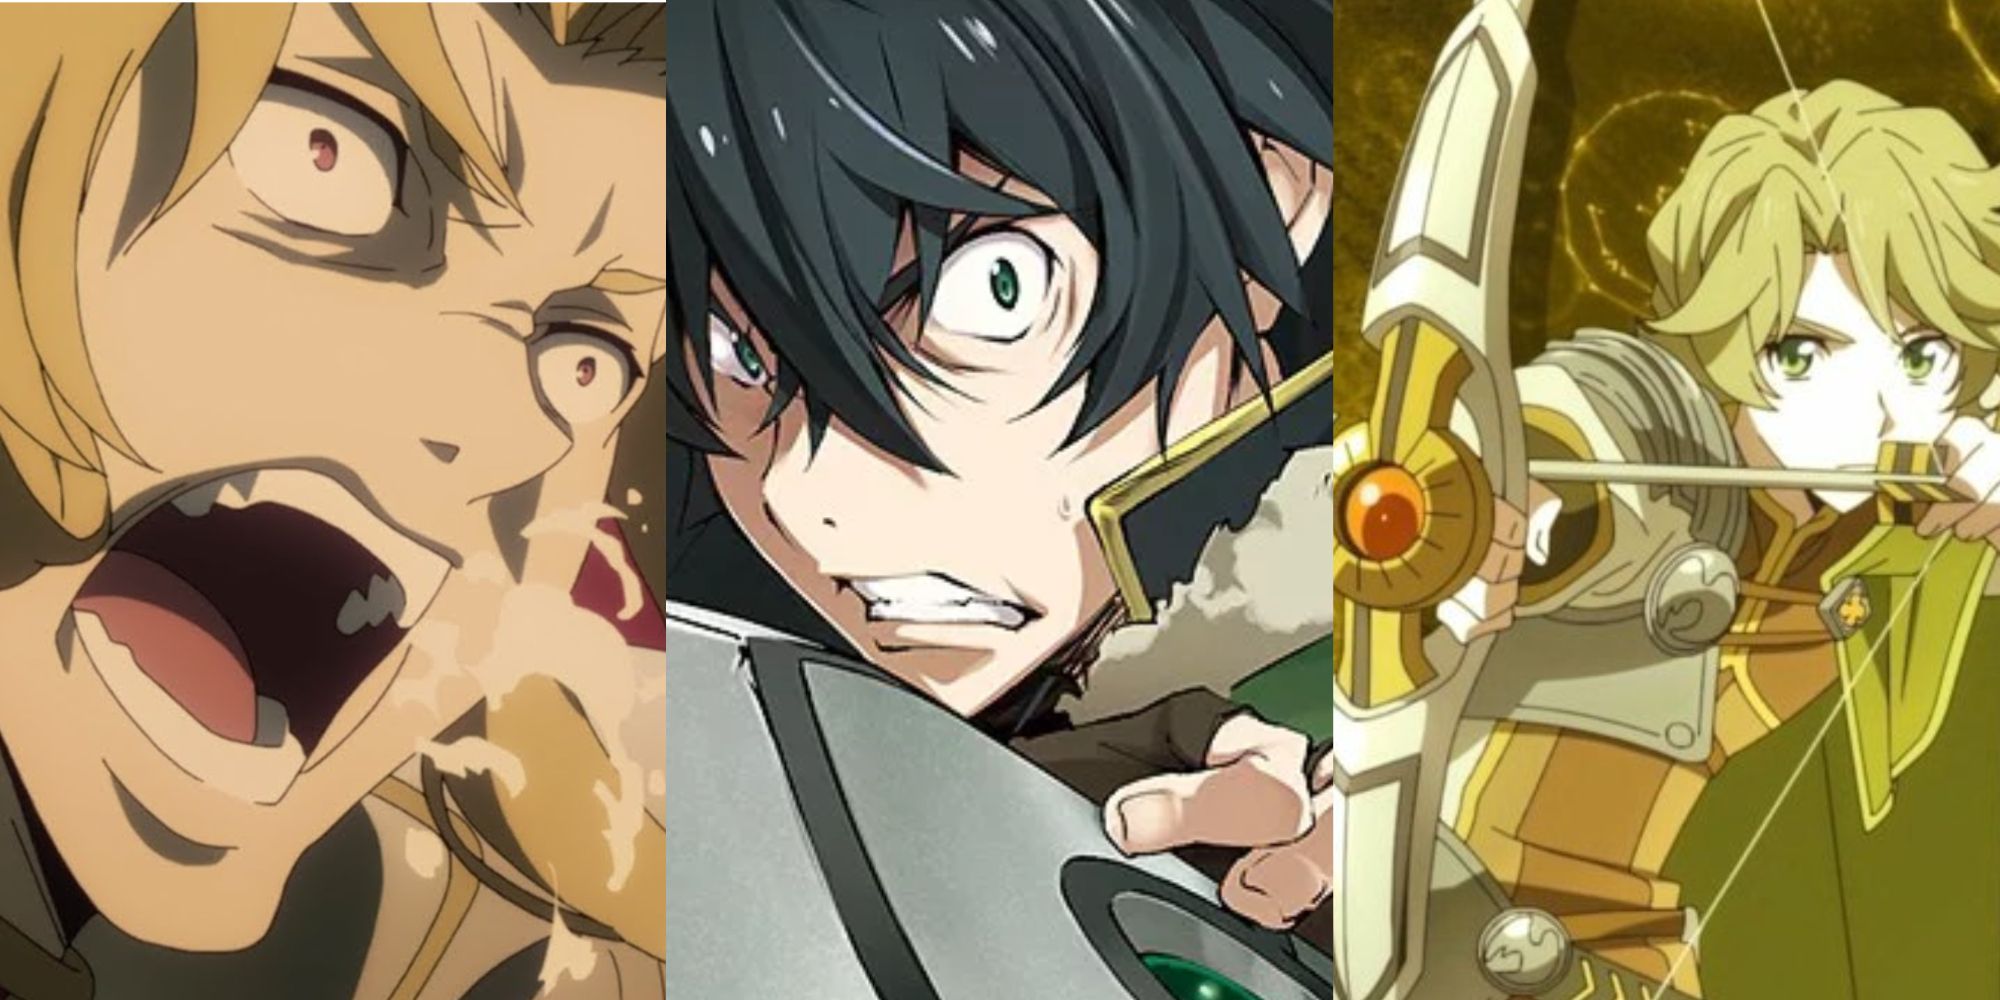 Who is the strongest in The Rising of the Shield Hero?